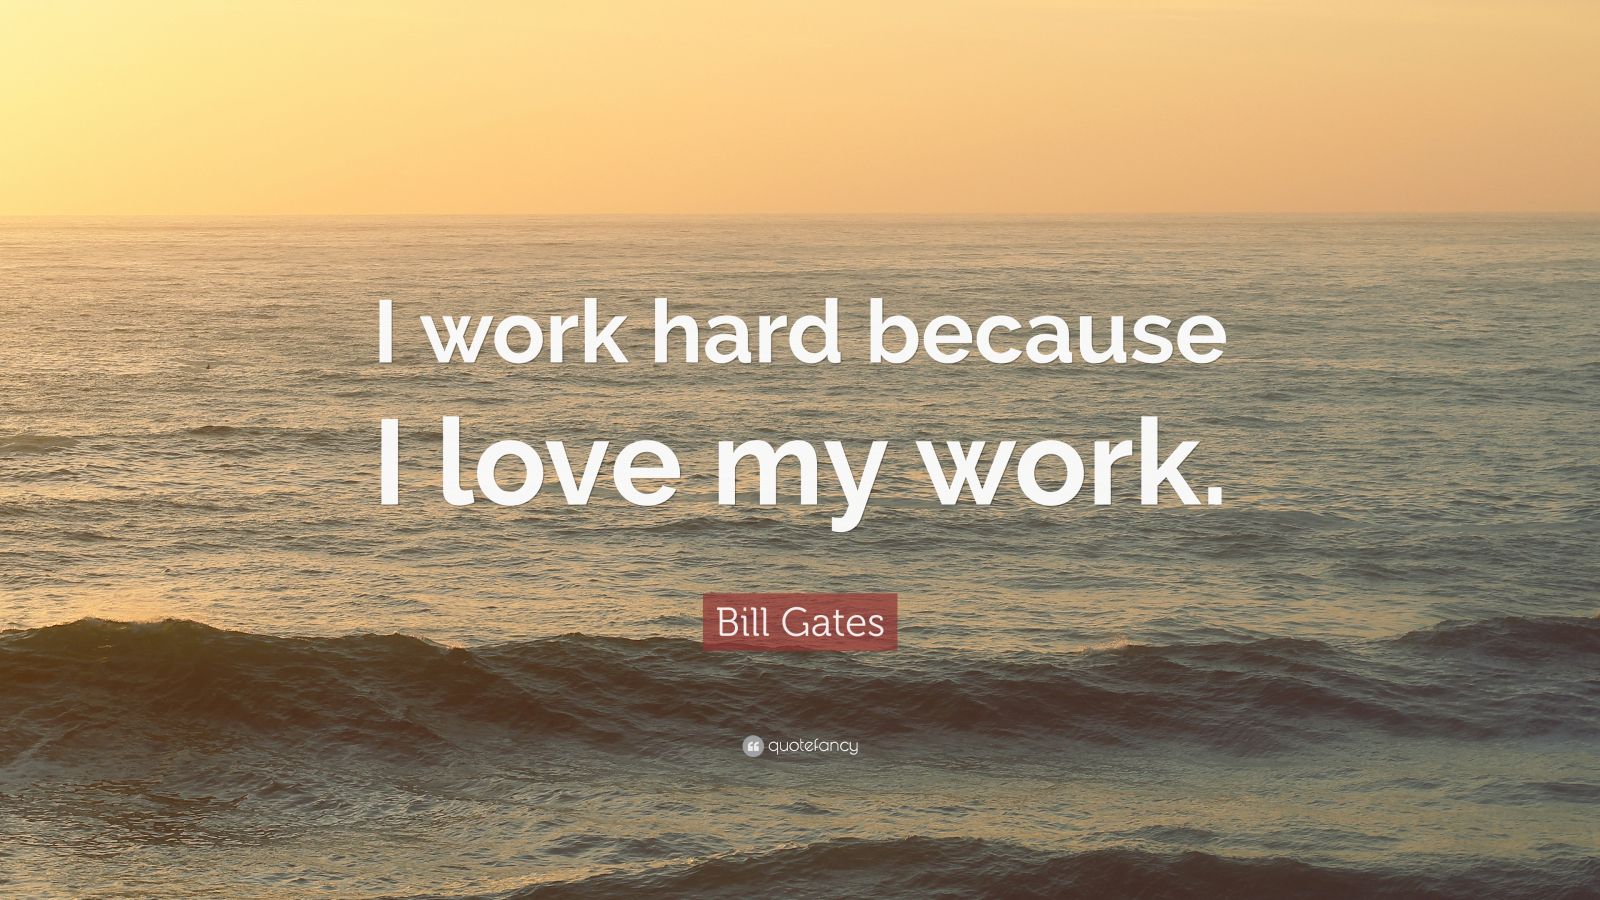 Bill Gates Quote: “I work hard because I love my work.” (12 wallpapers ...